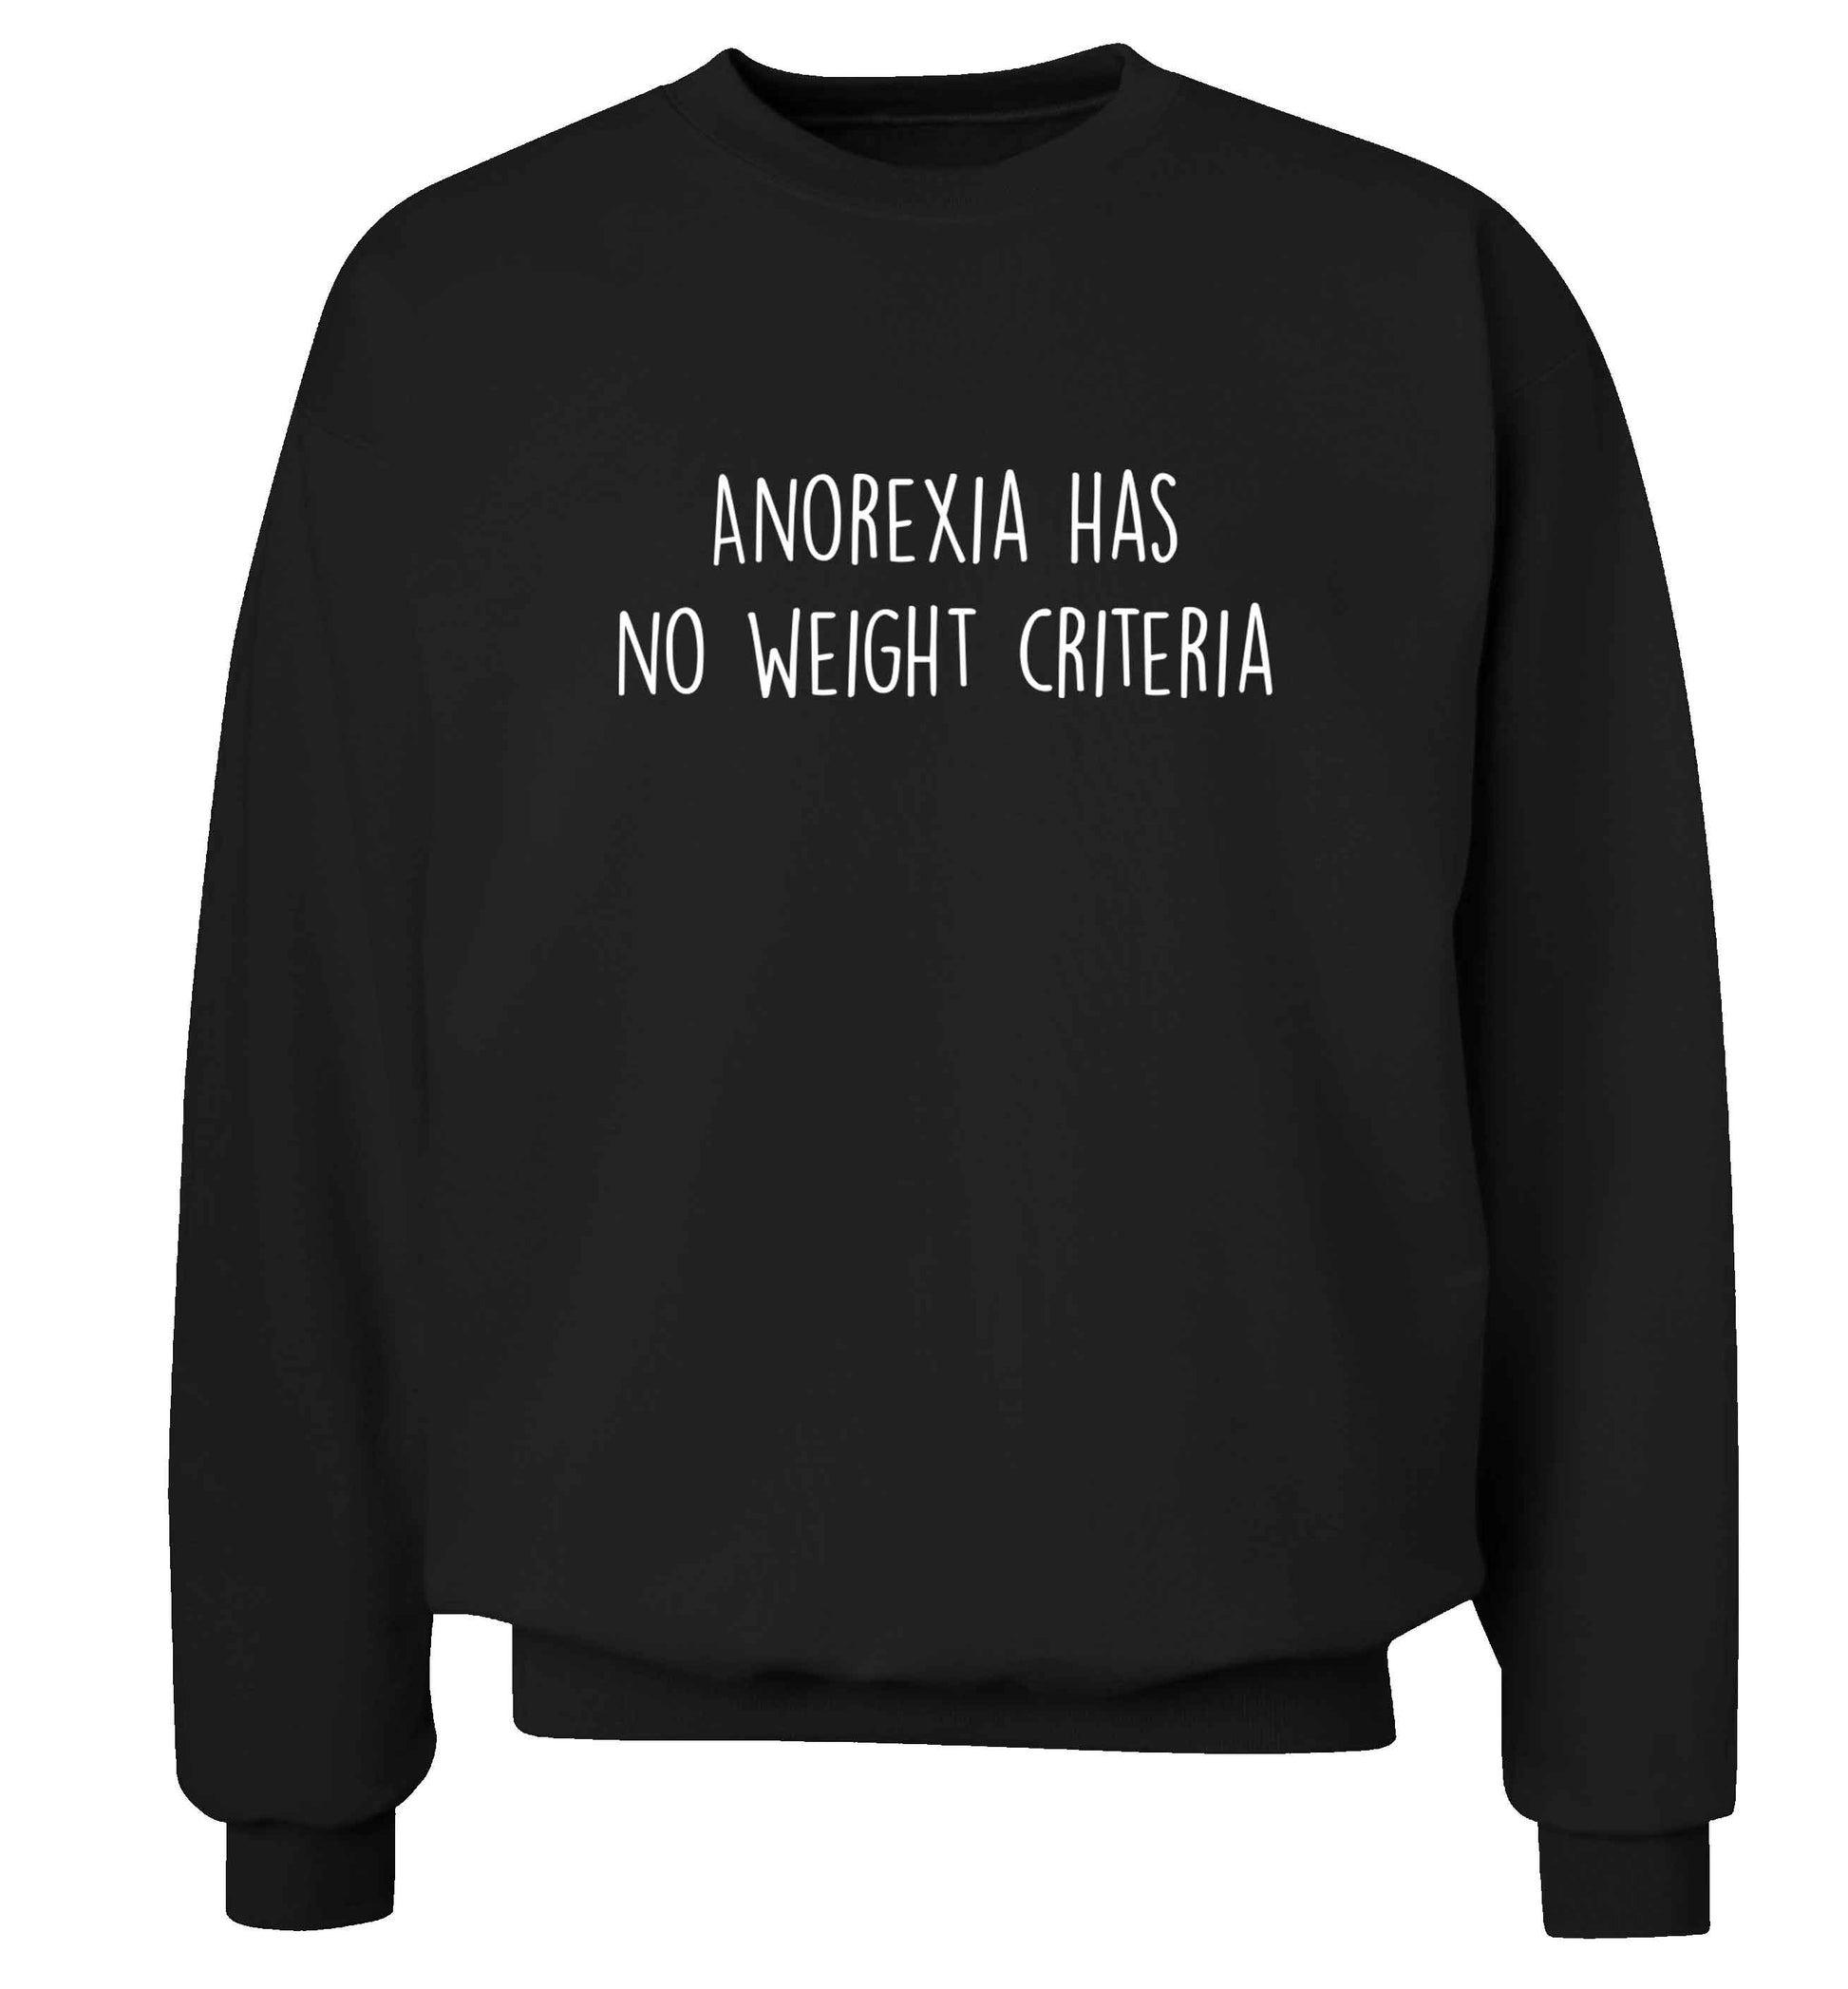 Anorexia has no weight criteria adult's unisex black sweater 2XL